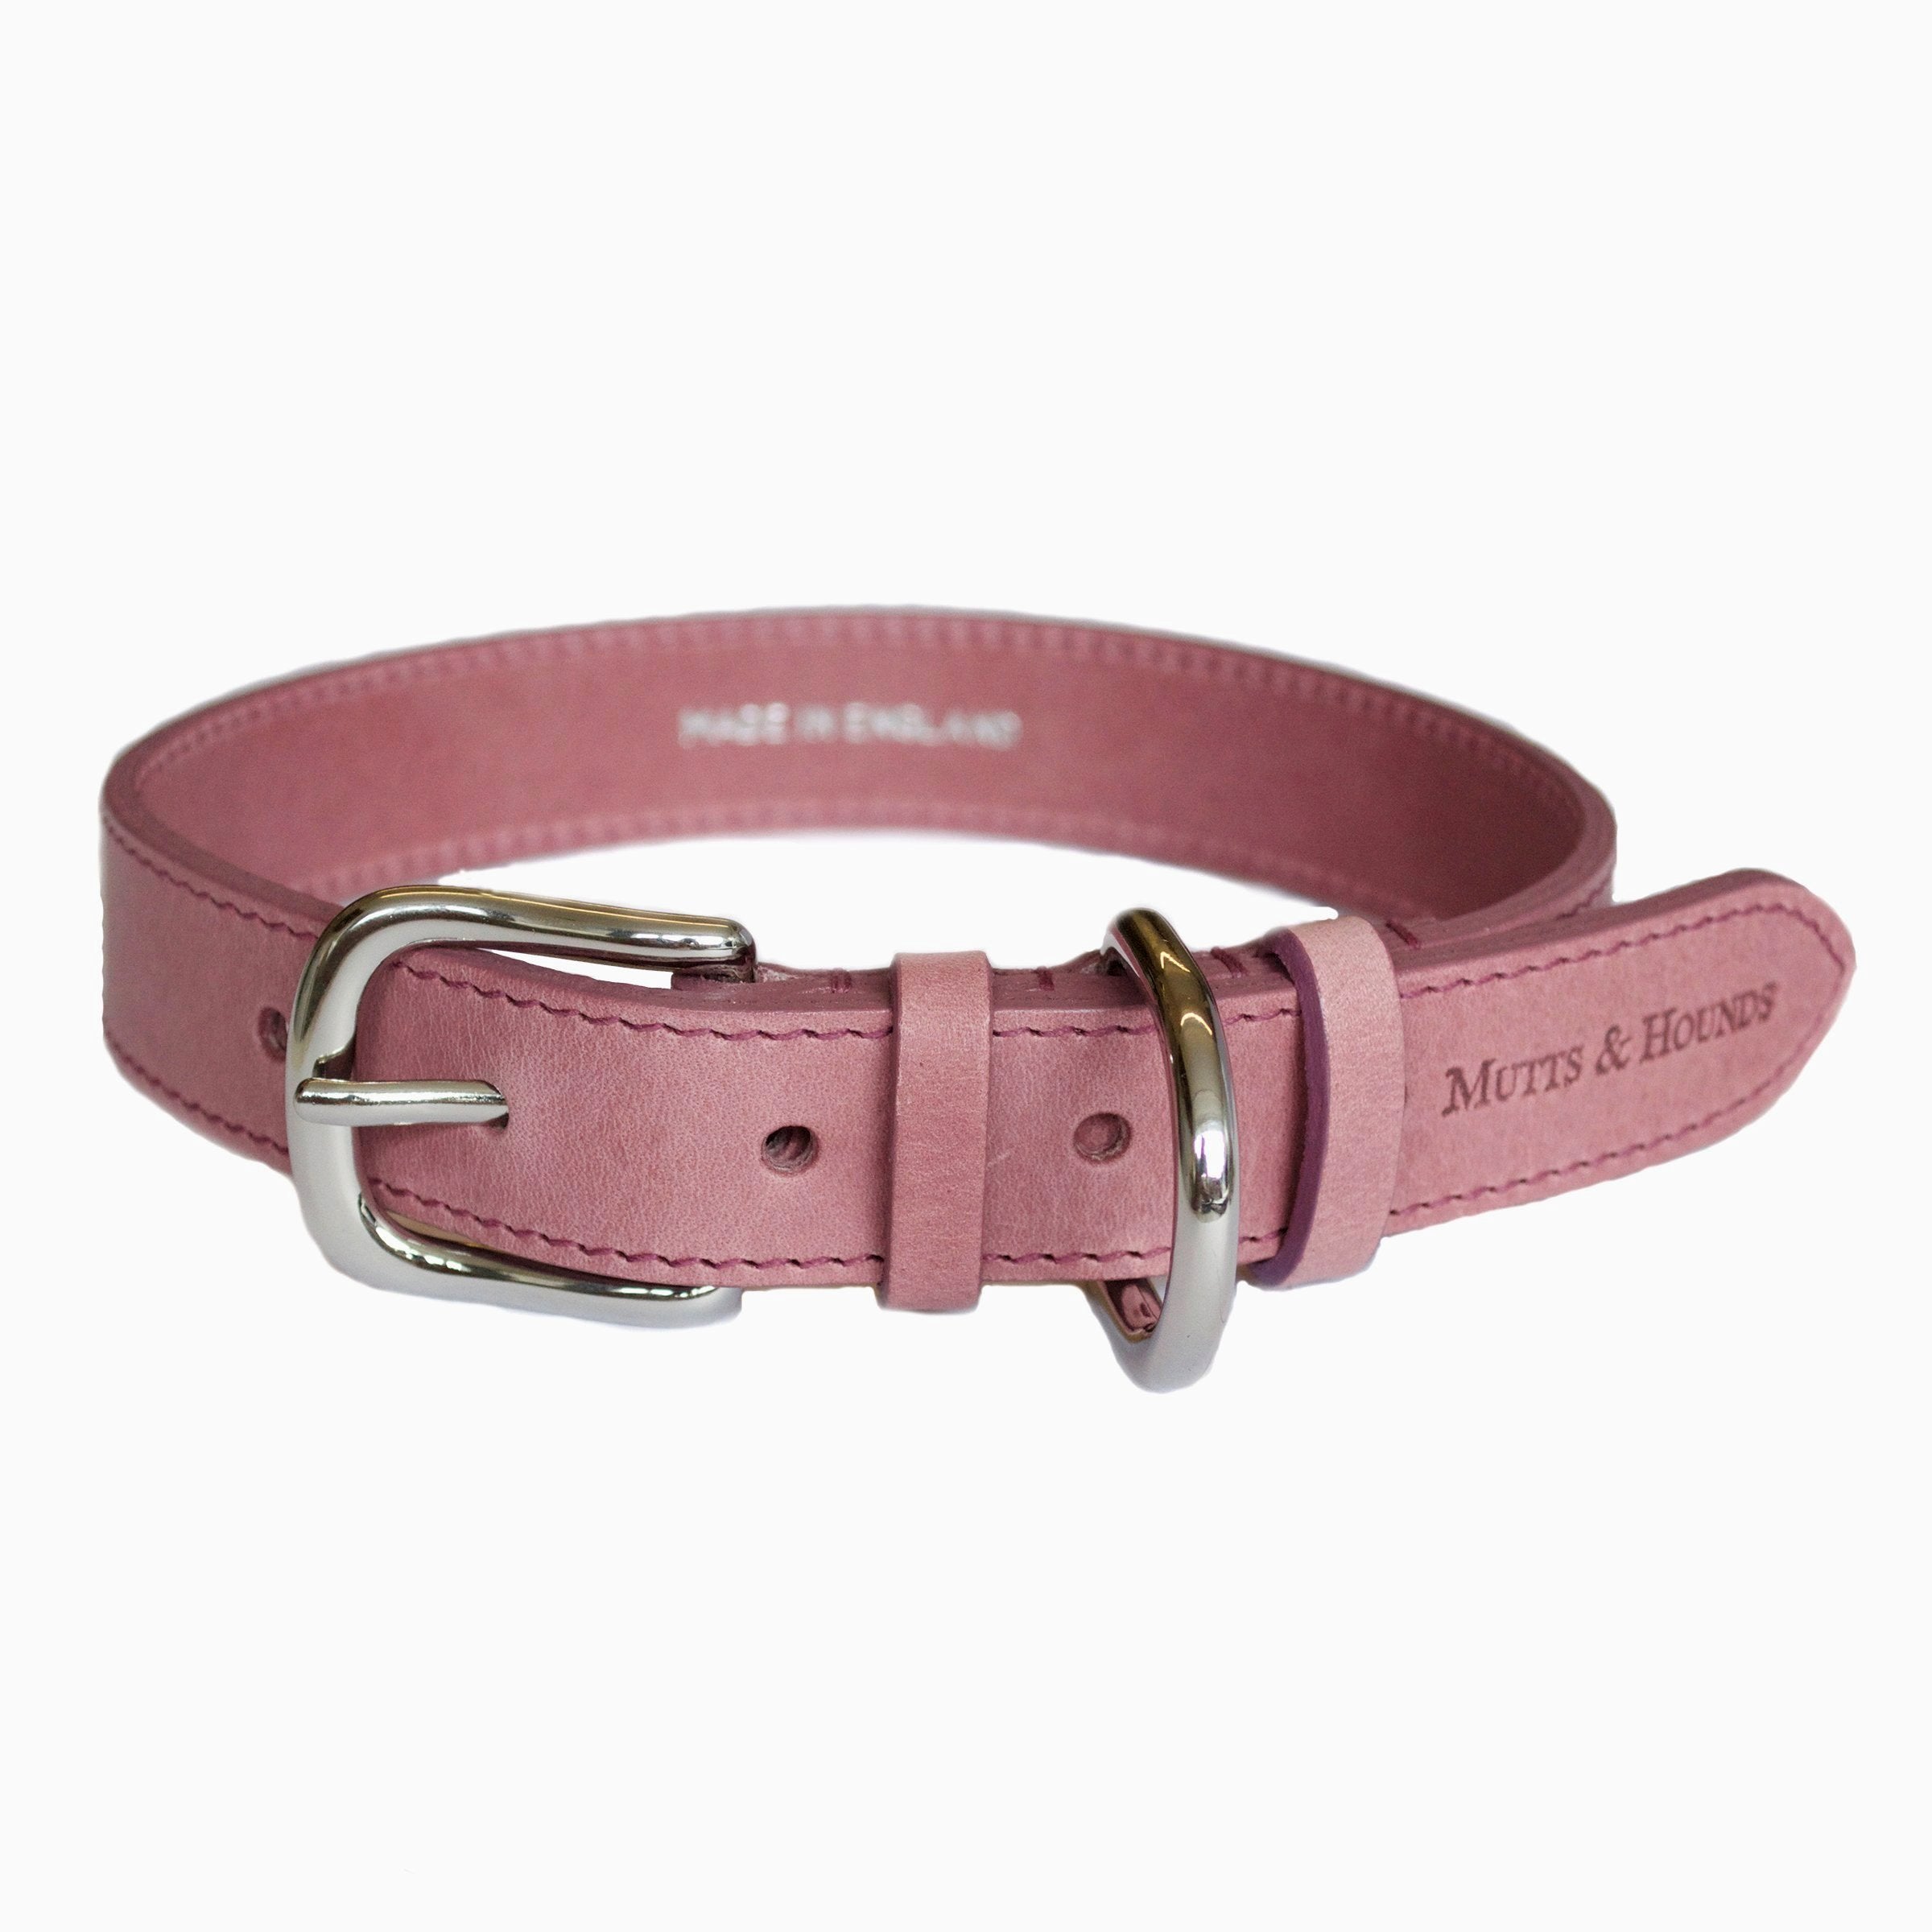 Leather Dog Leash - Heather - NEW PETS ON THE BLOCK.COM